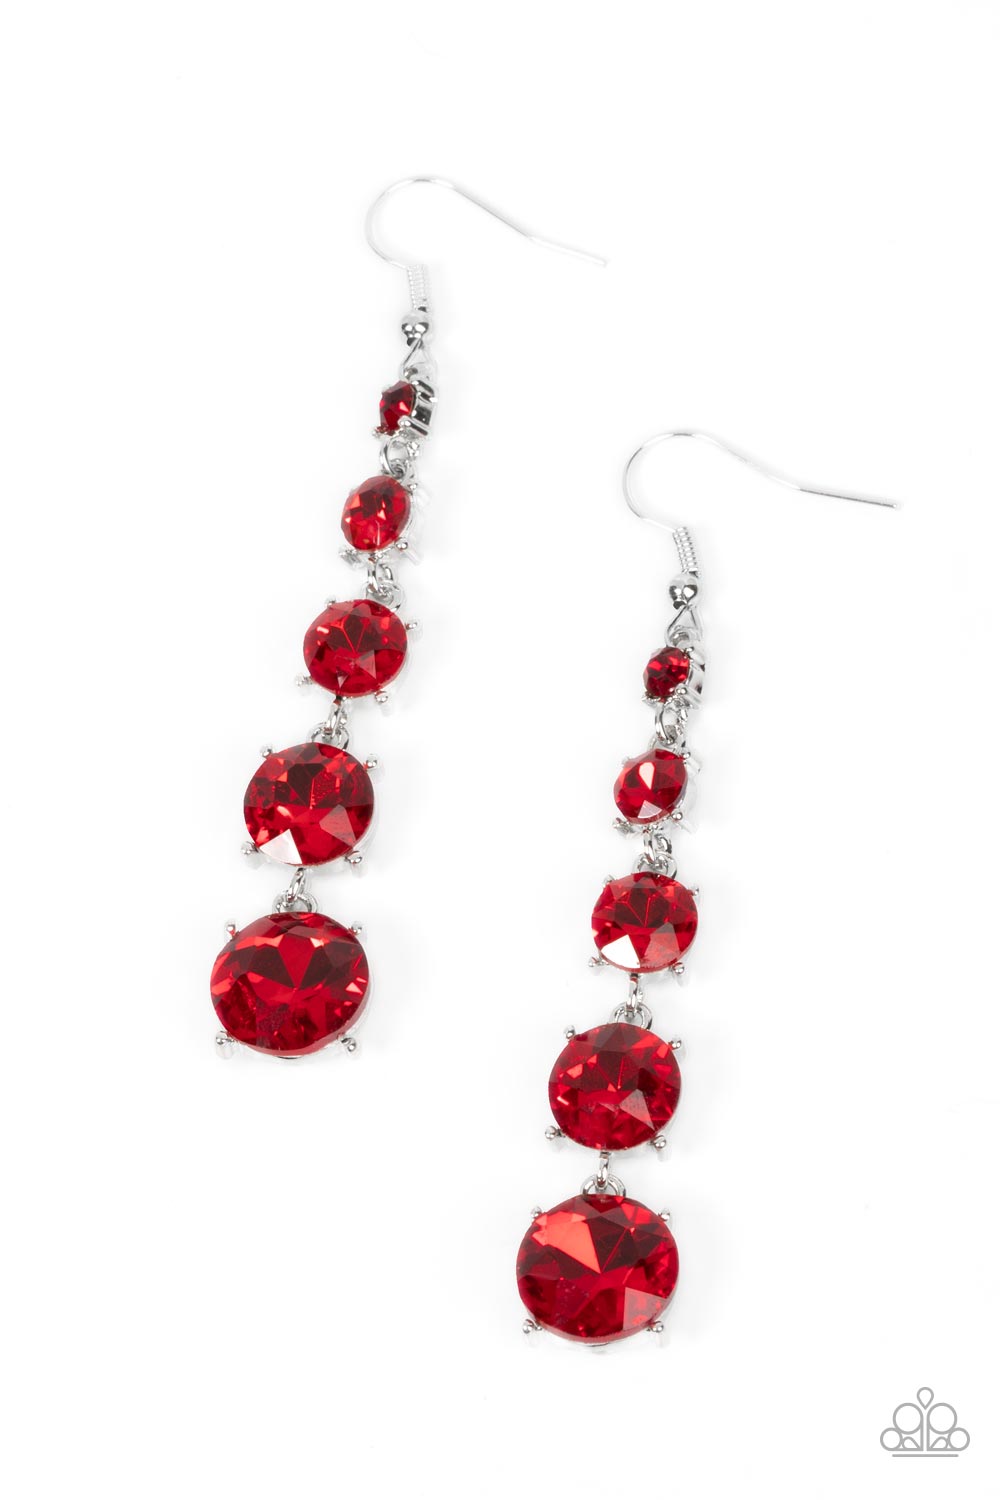 Paparazzi Accessories - Red Carpet Charmer - Red Earrings - Bling By Titia Boutique